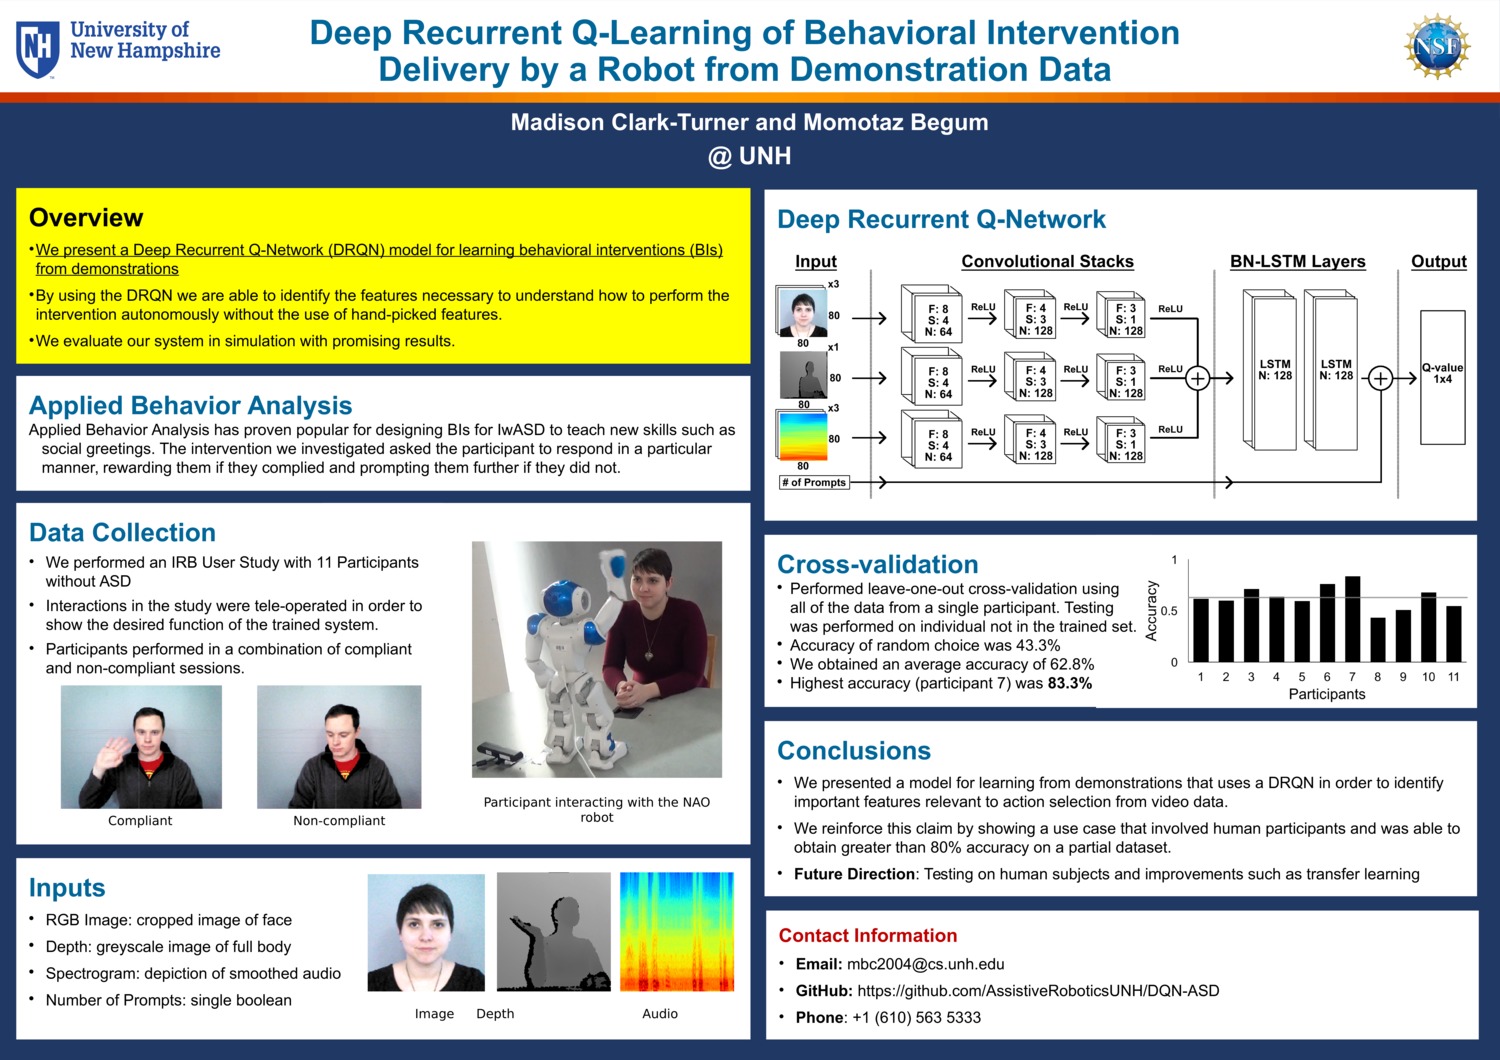 Deep Recurrent Q-Learning Of Behavioral Intervention  Delivery By A Robot From Demonstration Data  by mbc2004